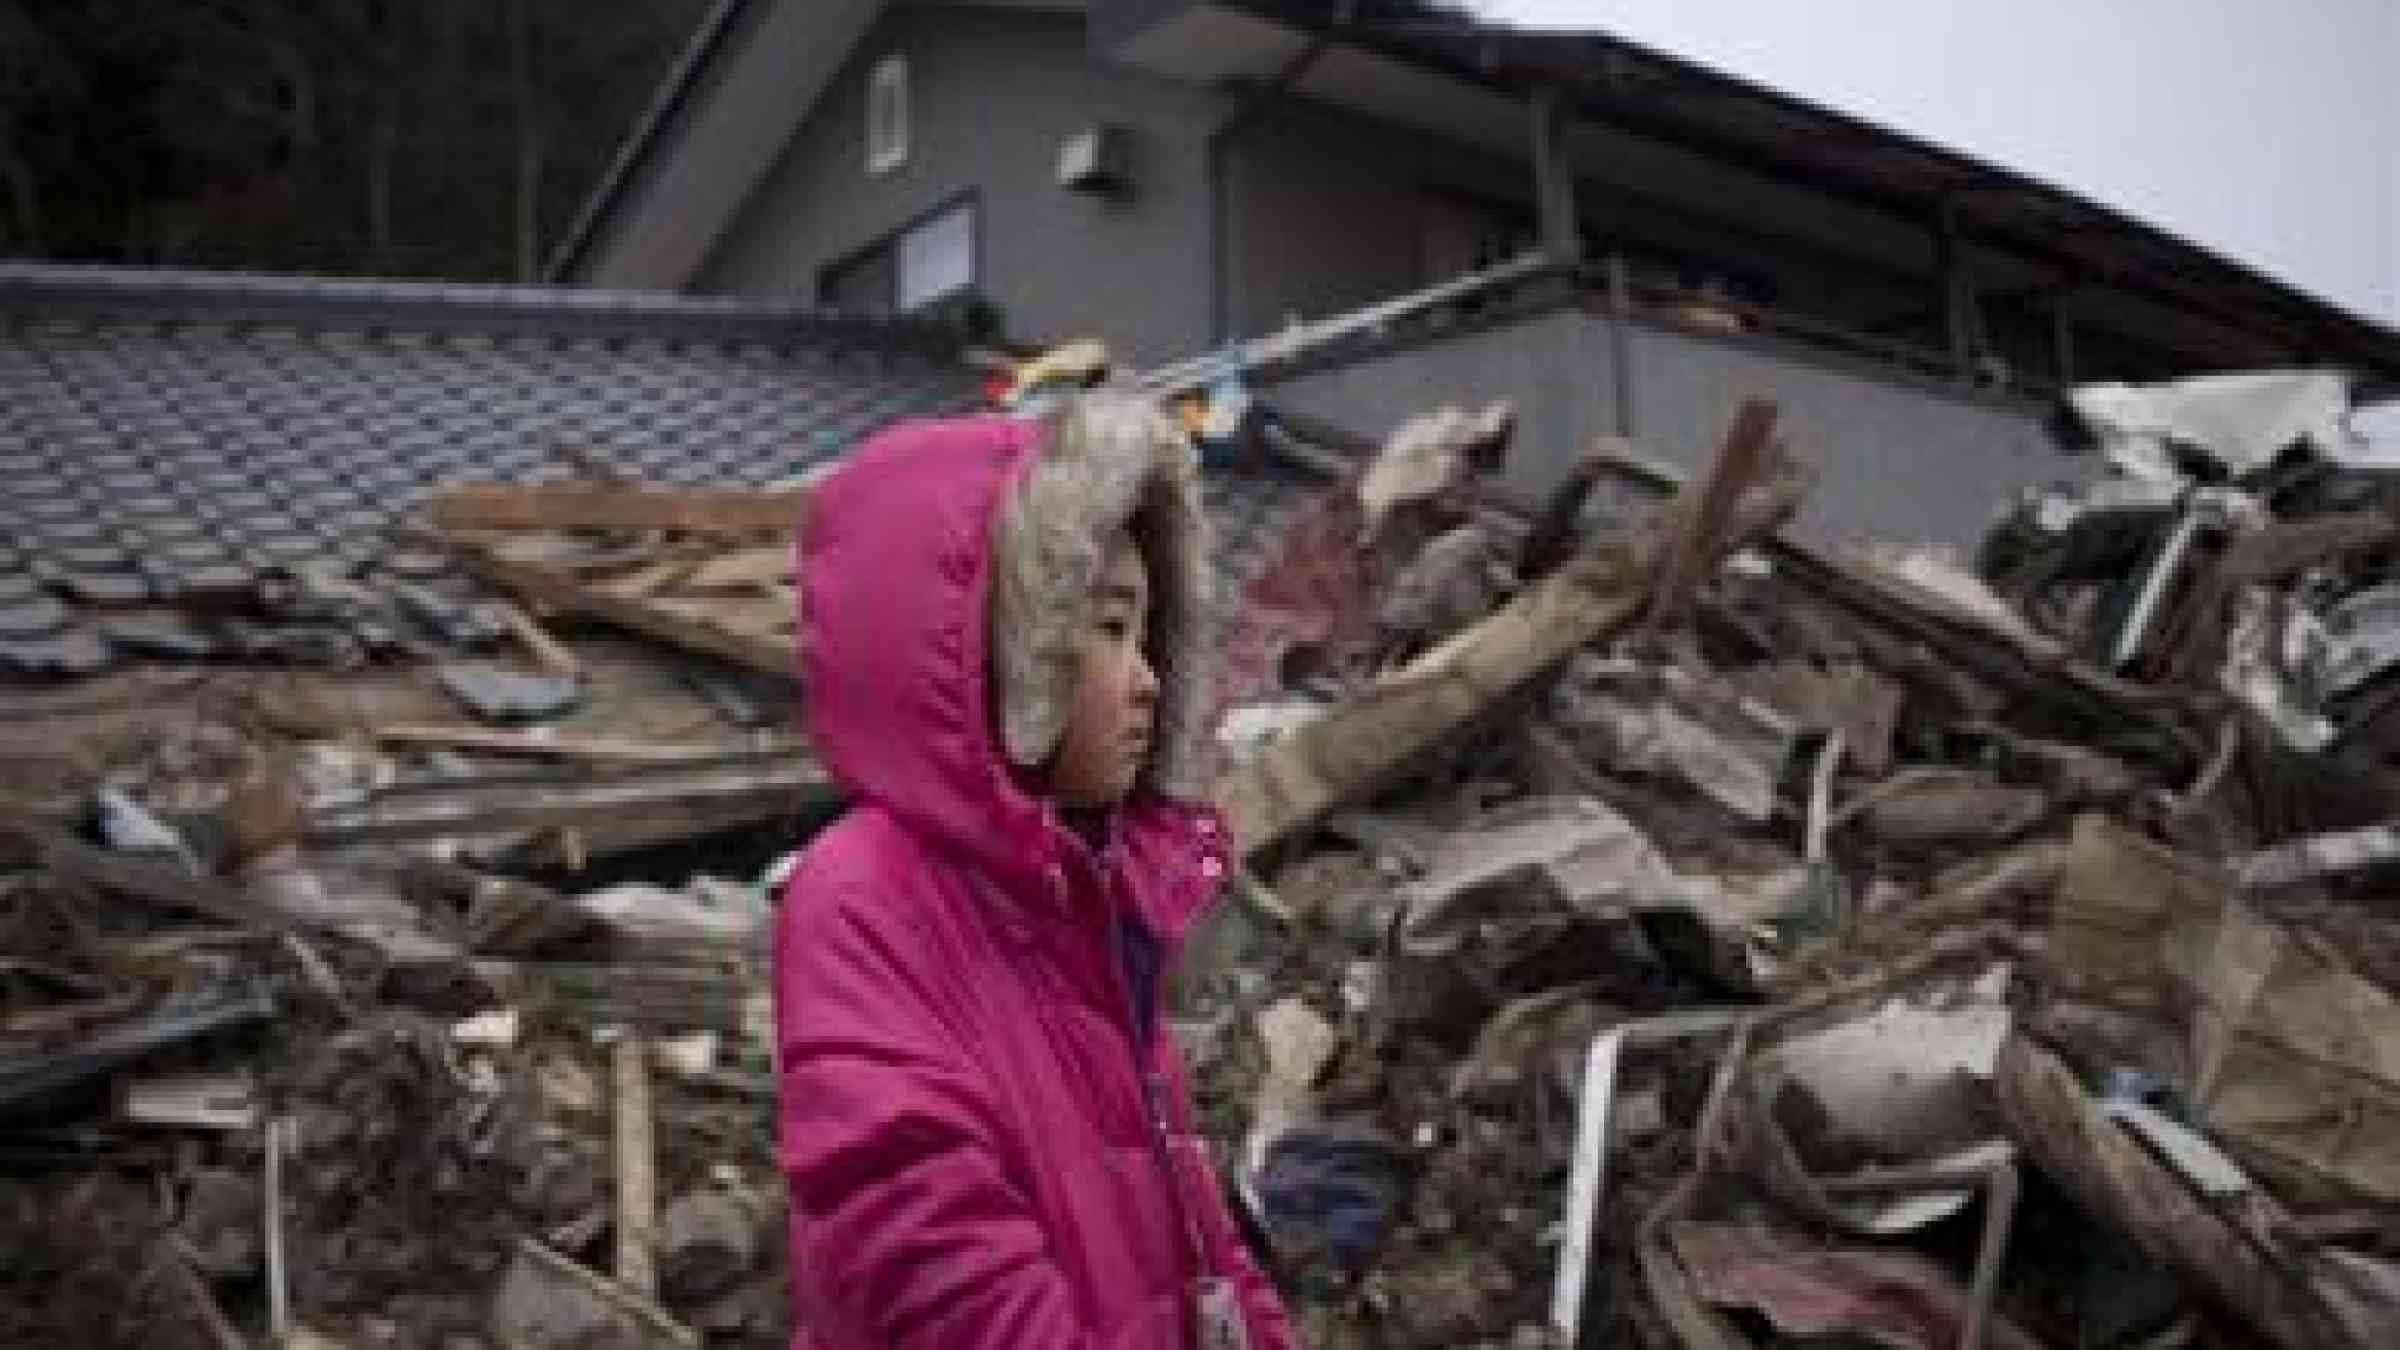 Photo by UNICEF/NYHQ2011-0427/Dean Neena (5) surveys the wreckage of her home, which was destroyed by the 2011 tsunami in Japan https://unicefconnect.files.wordpress.com/2015/03/uni106631.jpg?w=667